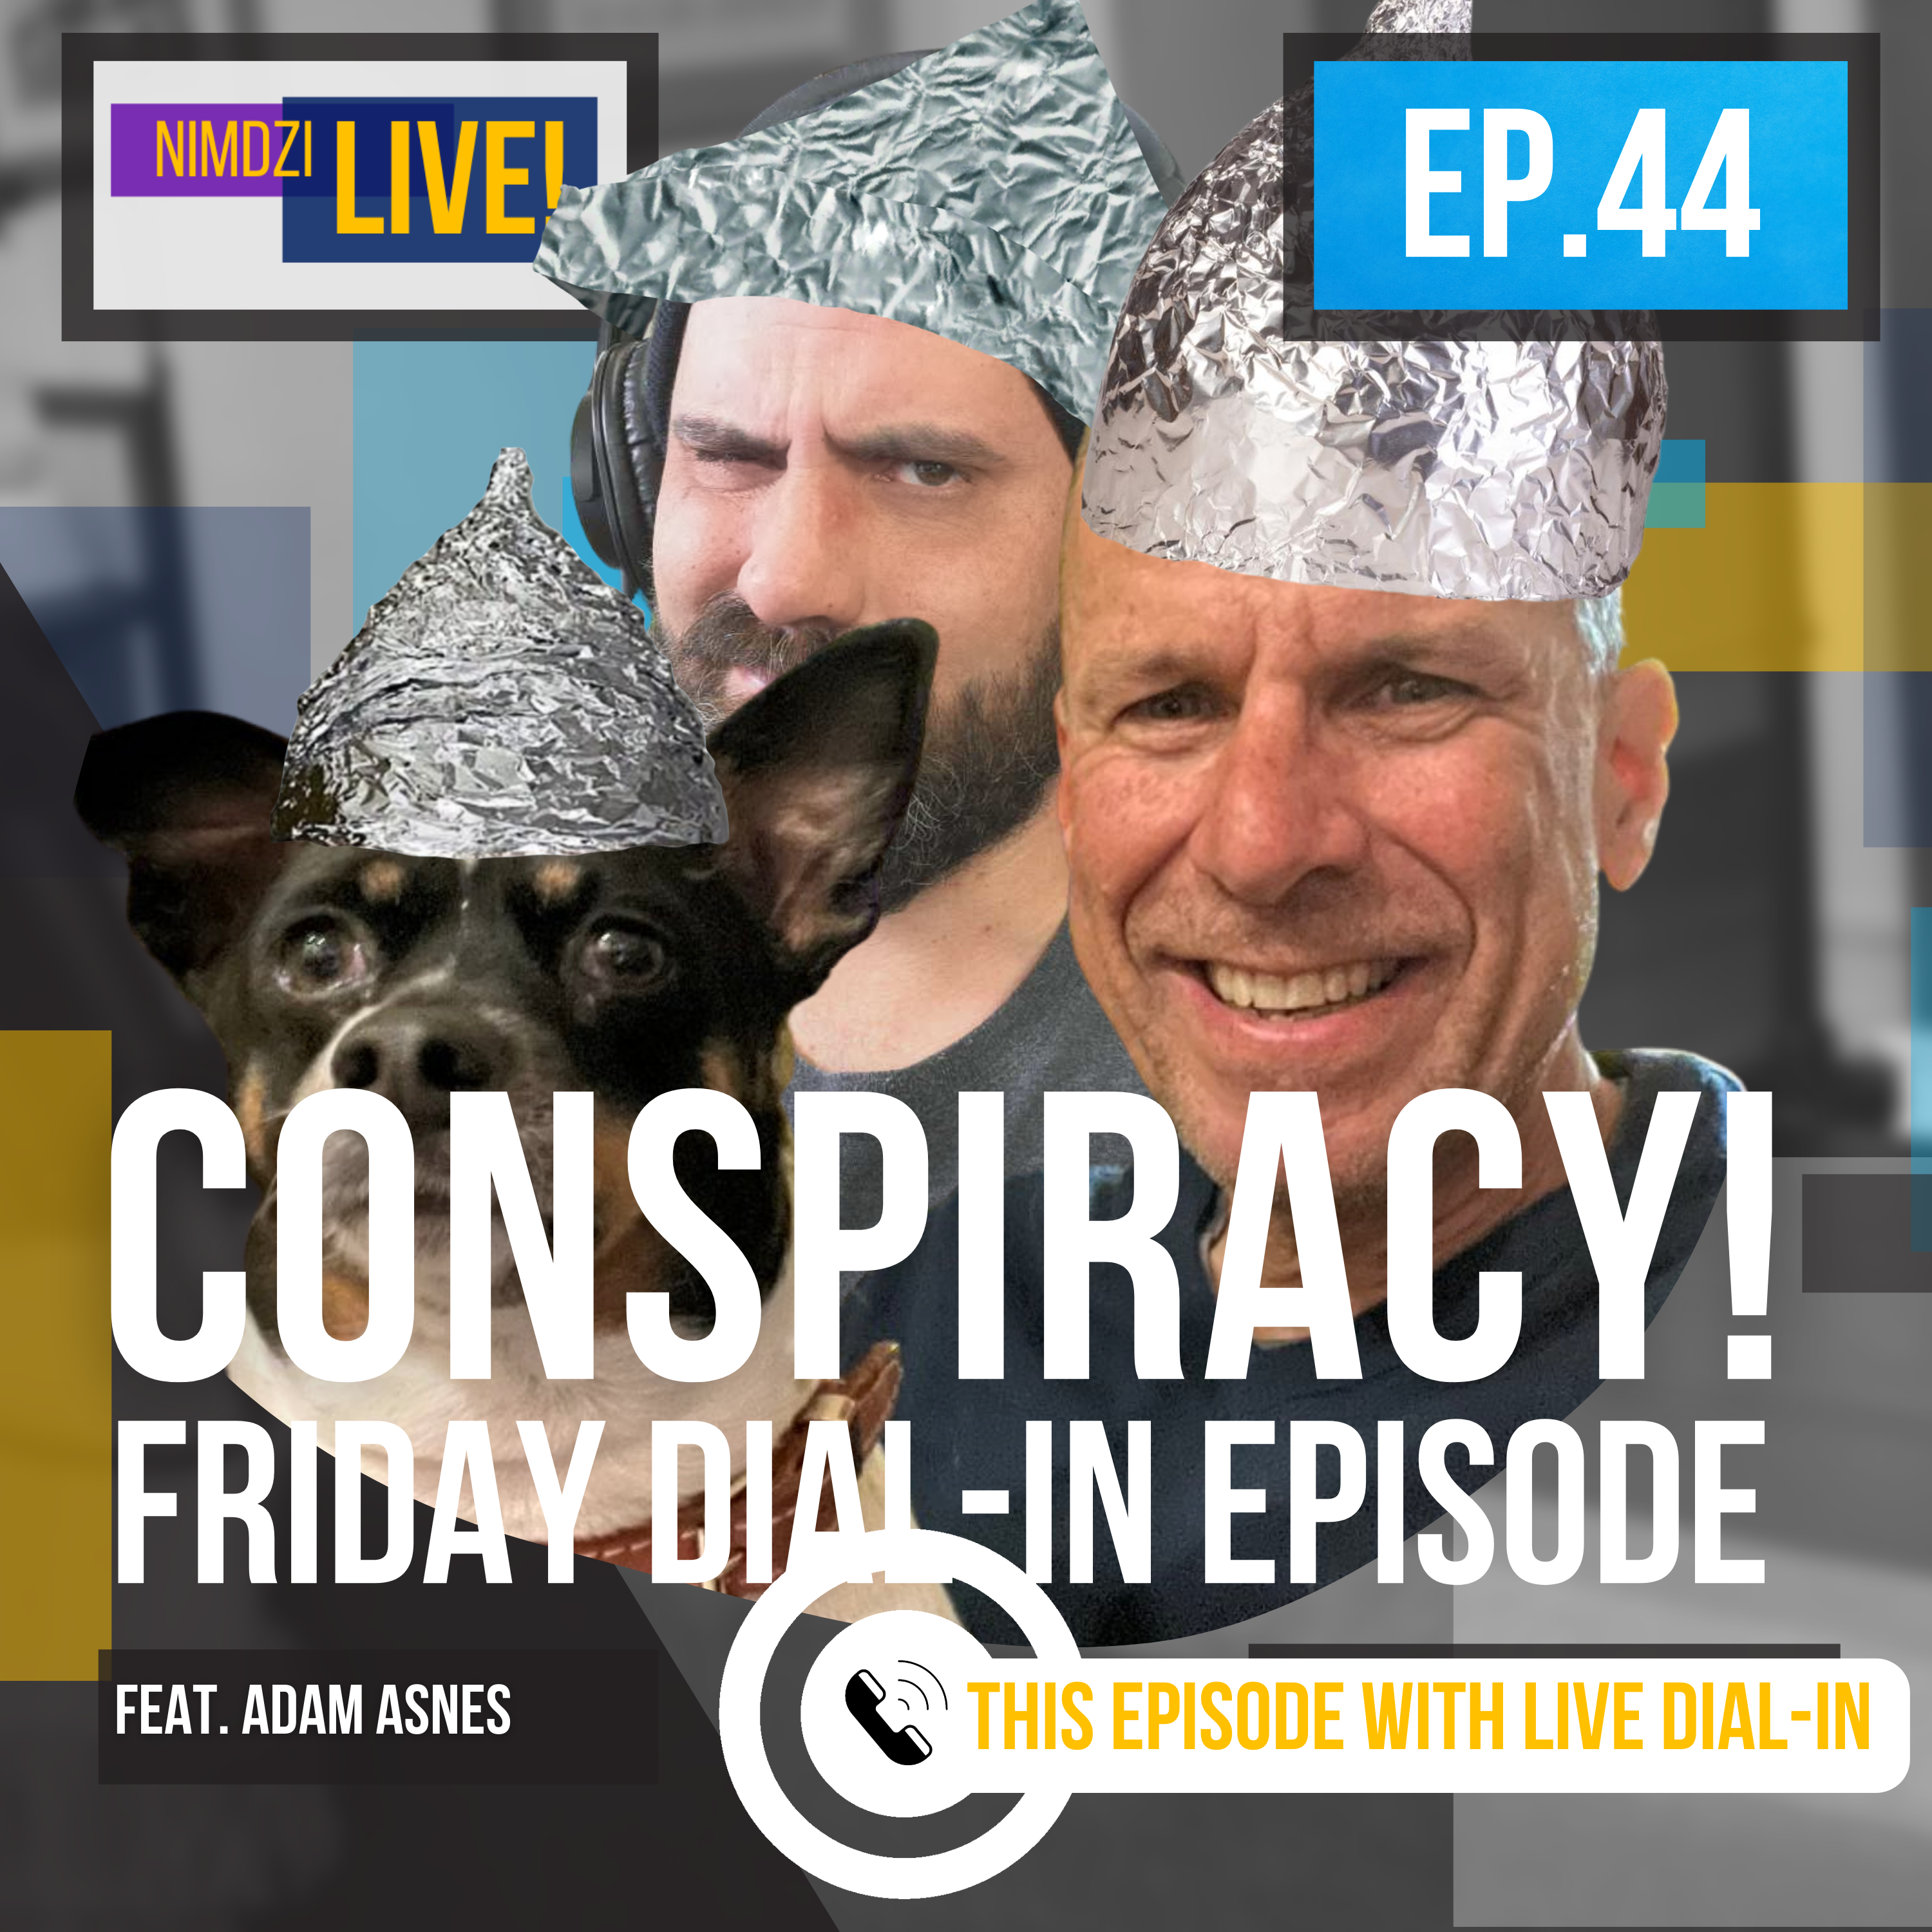 CONSPIRACIES in localization - a Friday Chat (feat. Adam Asnes and listener call-in)